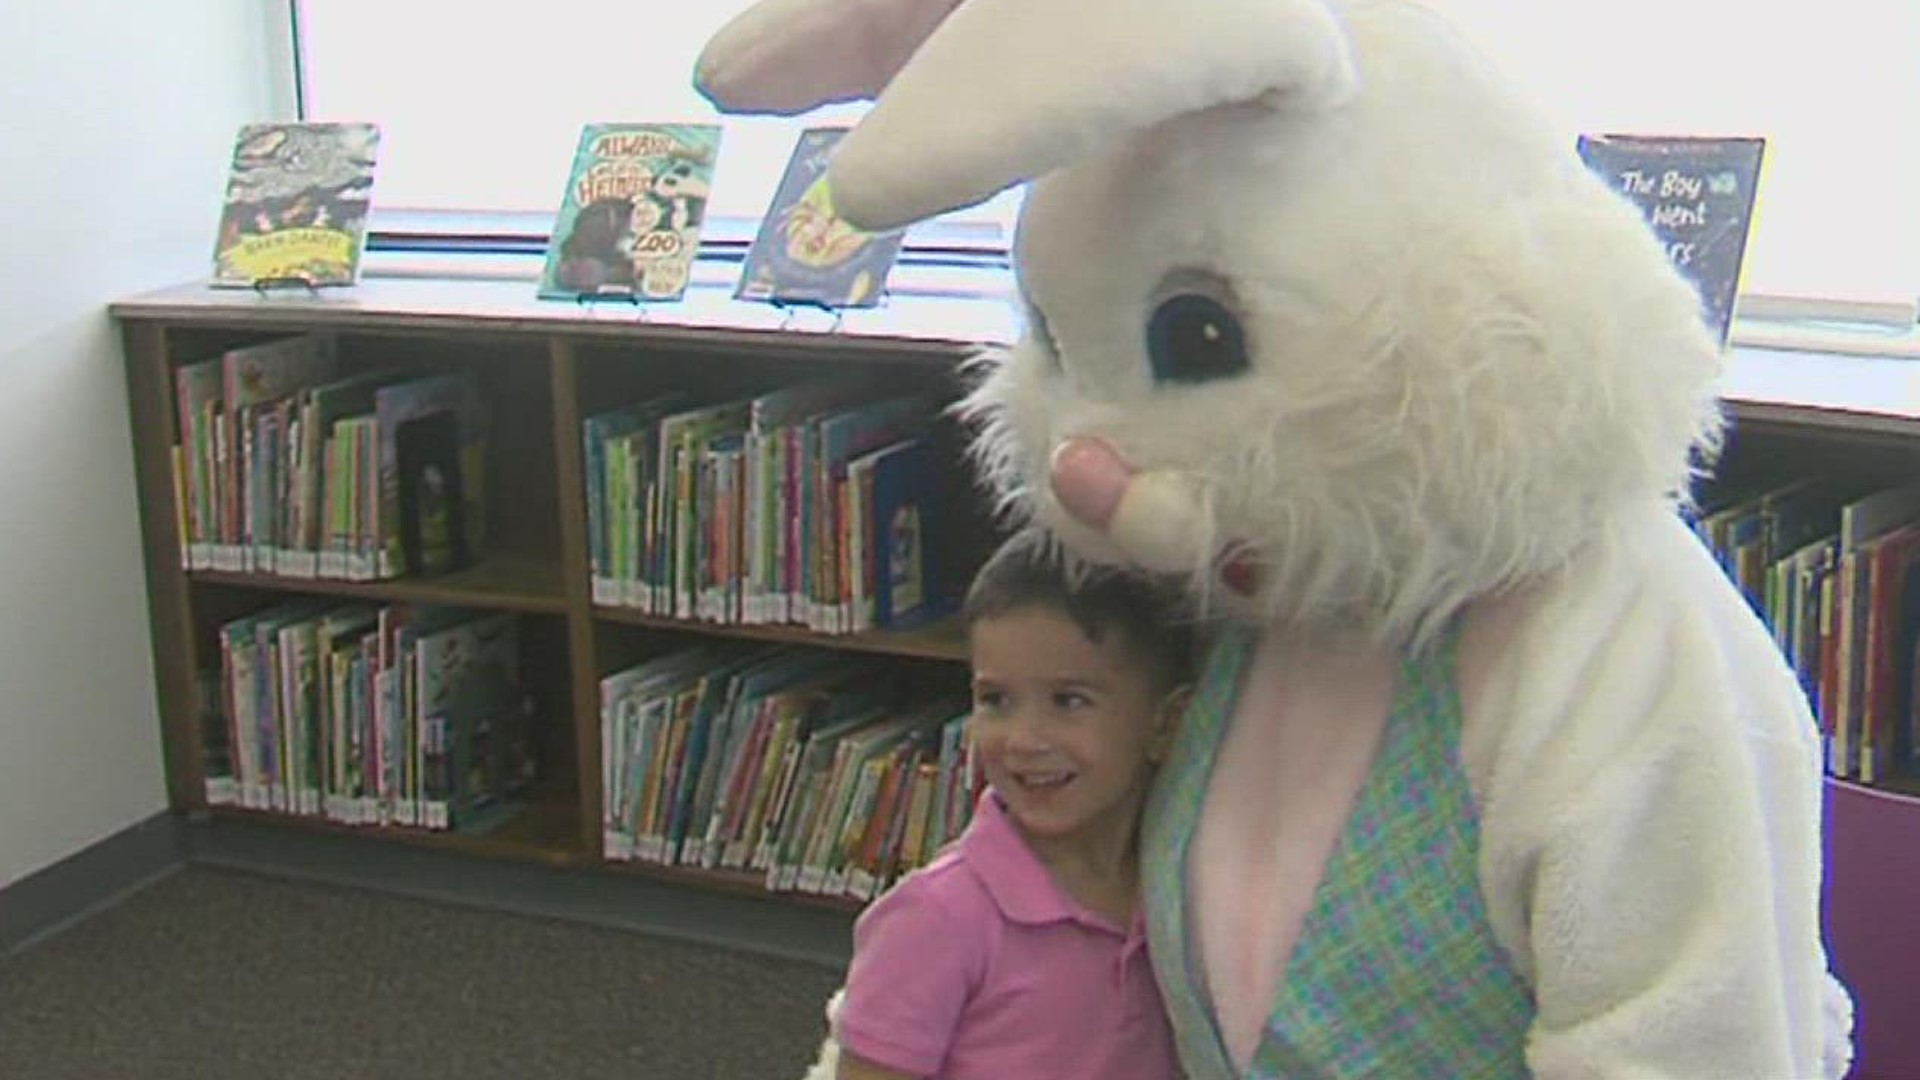 Student donates Easter baskets to teens less fortunate.